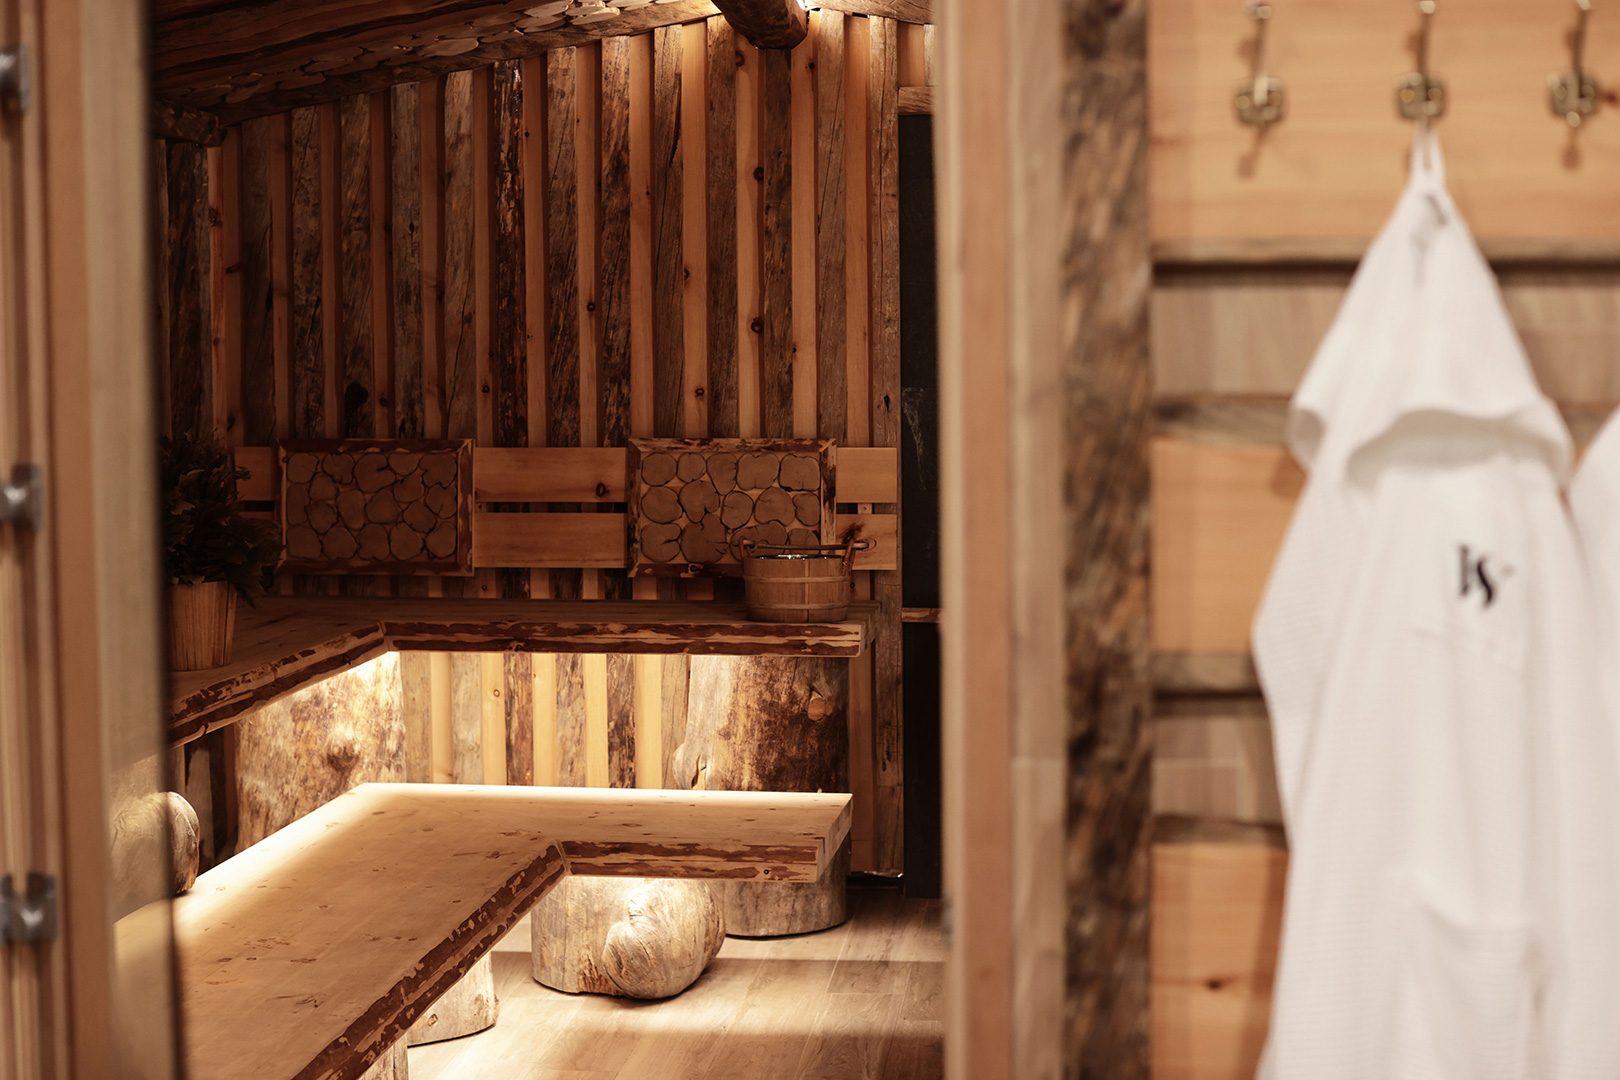 An empty sauna with rustic wooden benches and walls, complete with traditional sauna accessories like a wooden bucket and ladle. A white robe with a monogram WS is hanging on the wall, ready for use.